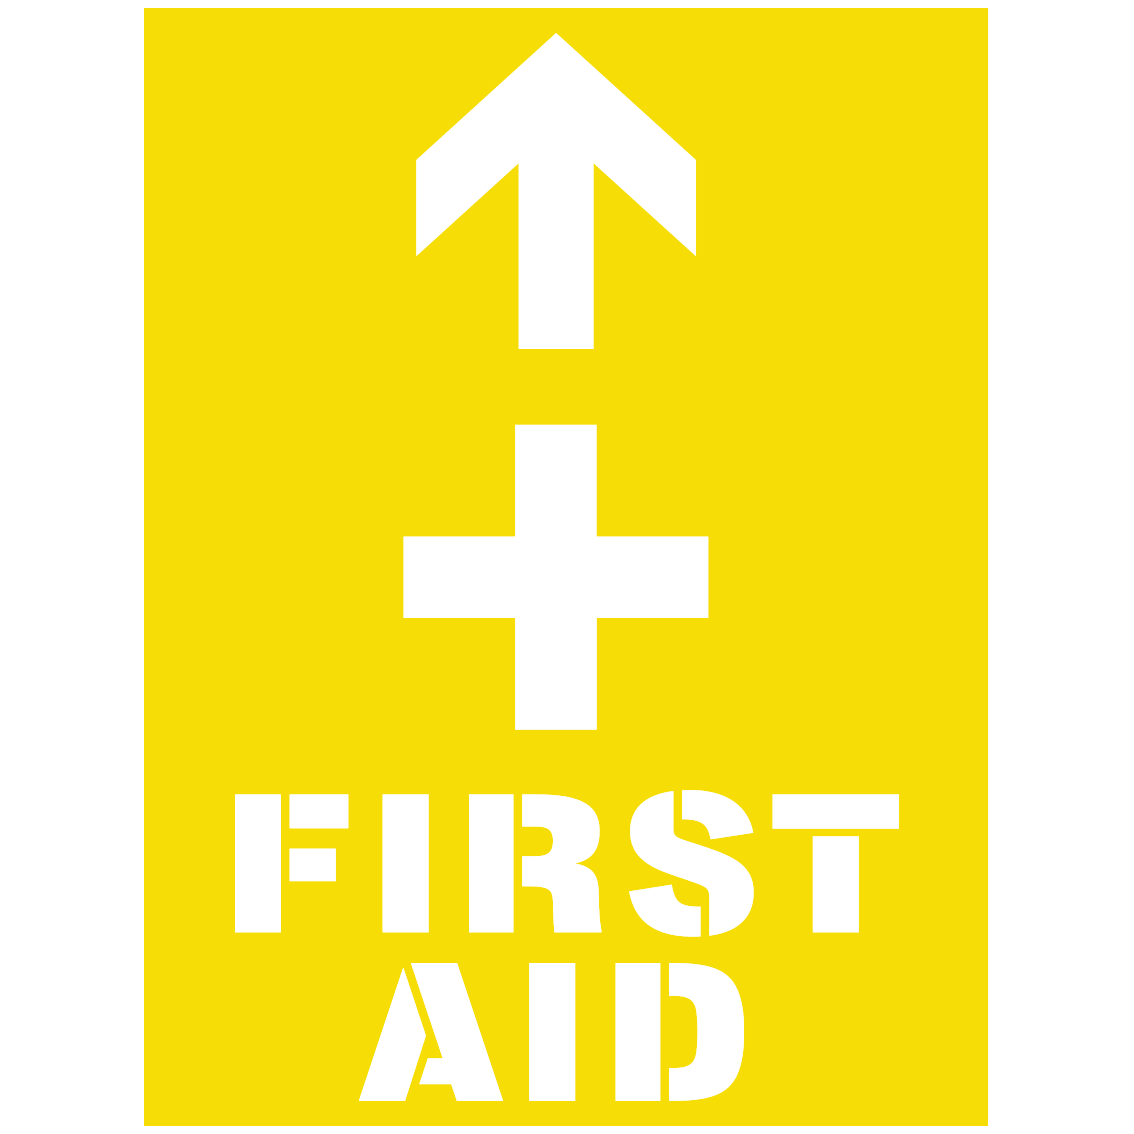 600x450mm – Poly Stencil – First Aid With Arrow